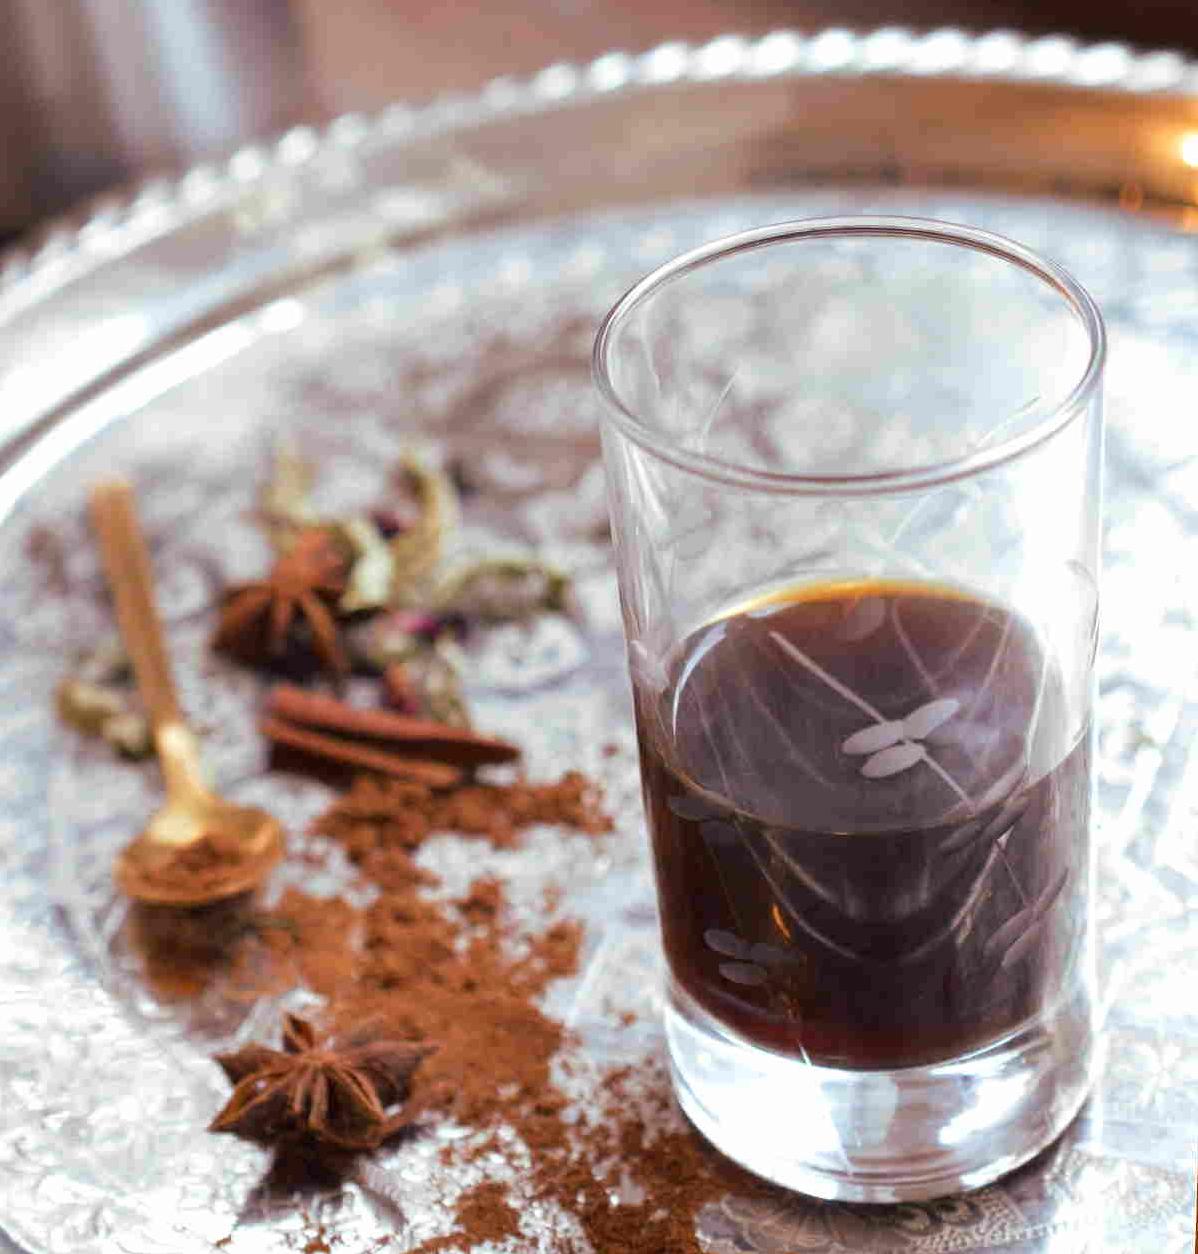  Say goodbye to plain old coffee and spice things up with this zesty recipe.